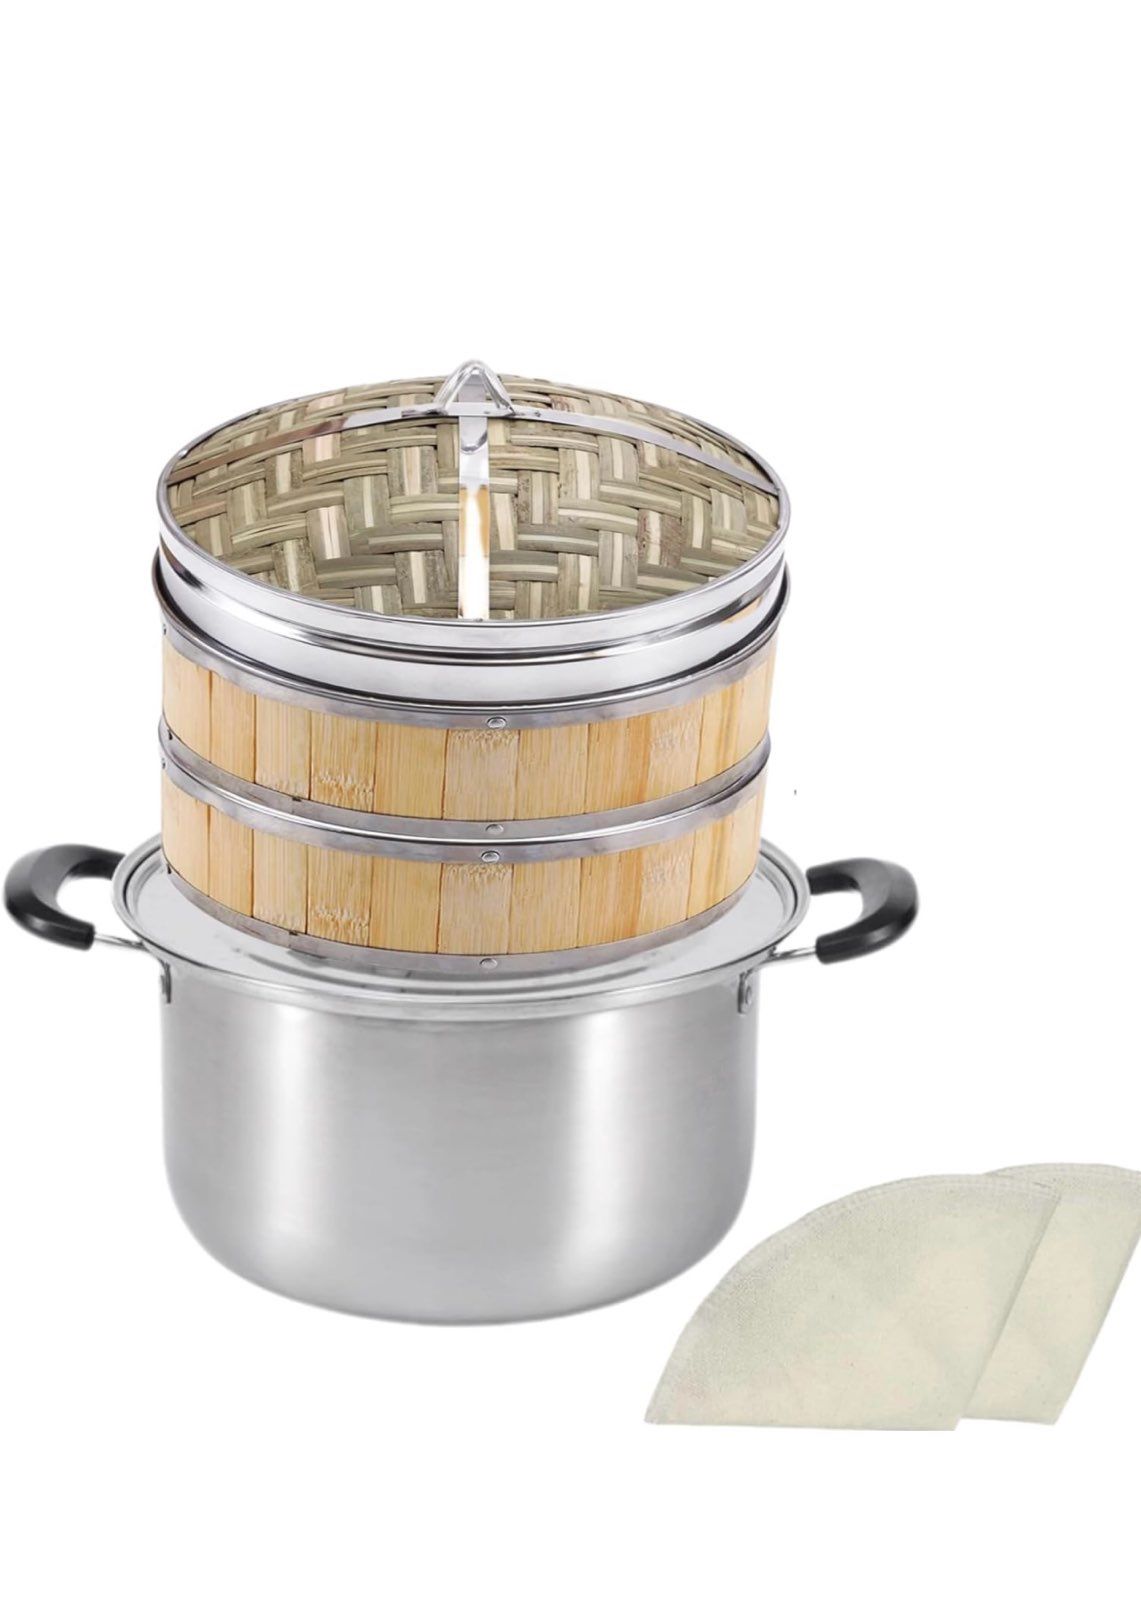 8.7 Inch Bamboo Steamer Basket, 2 Tier Bamboo Steamer for Cooking Dumpling Steamer with Pot, Cotton Liners, Steaming Ring for Bao, Dim